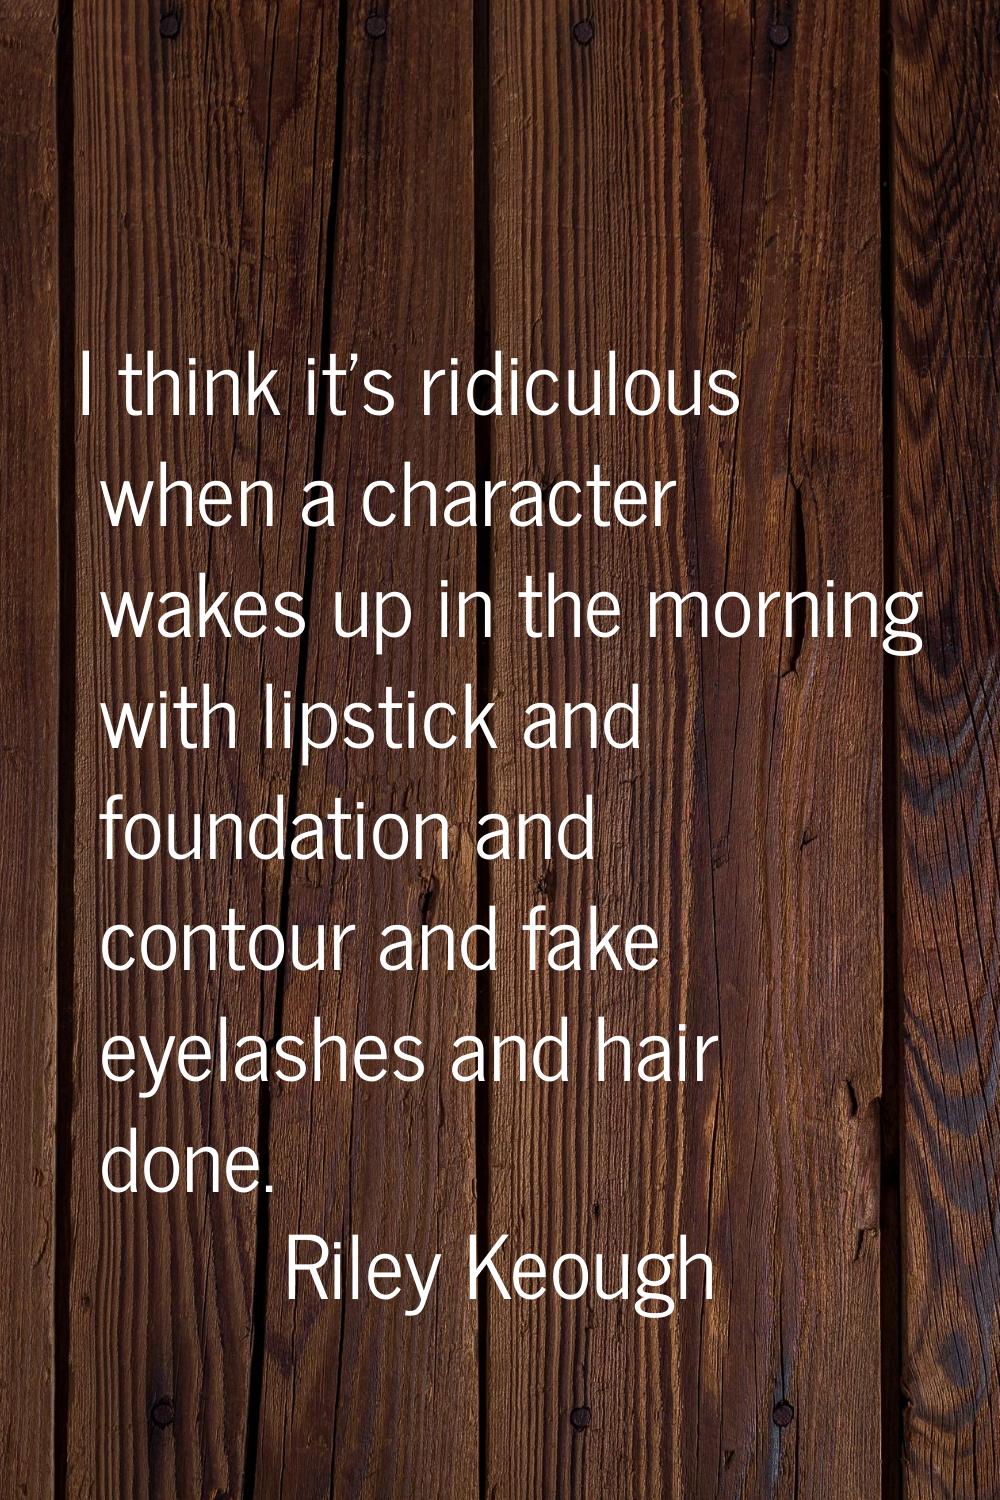 I think it's ridiculous when a character wakes up in the morning with lipstick and foundation and c